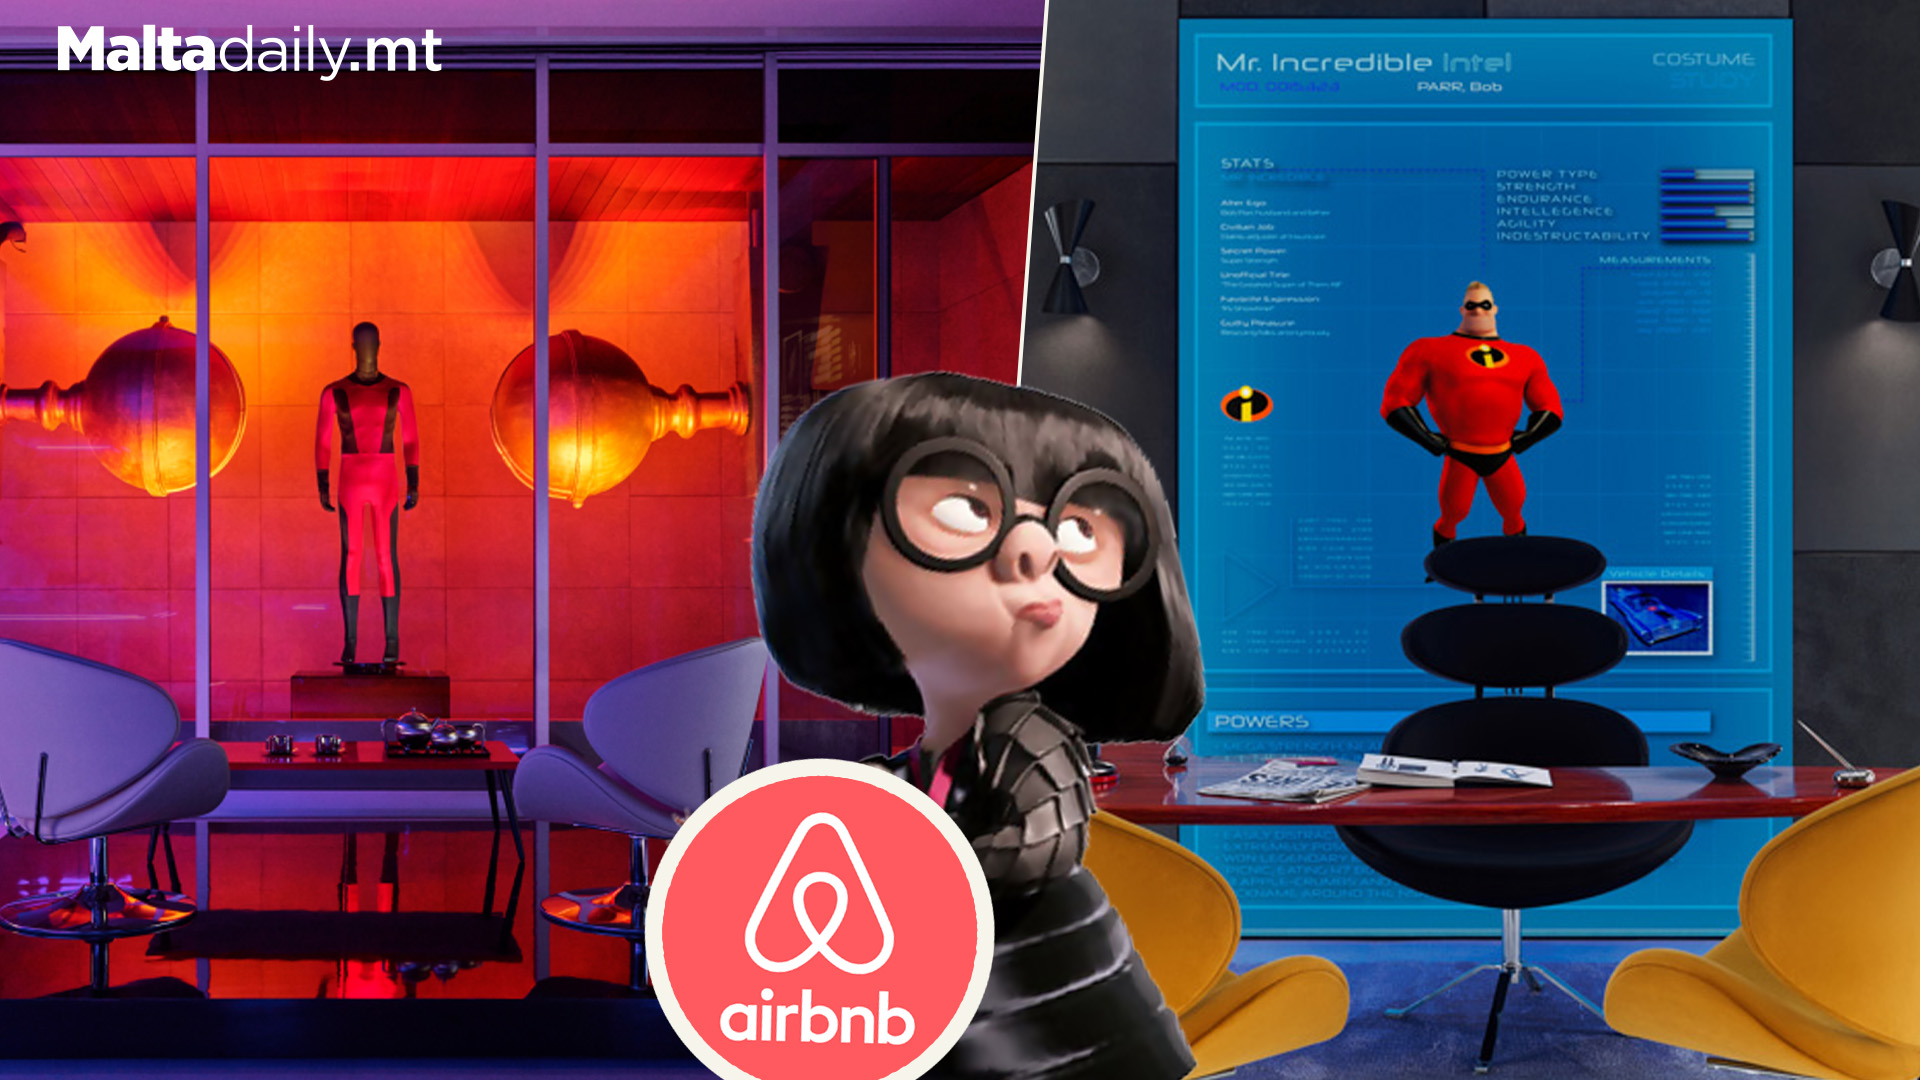 Airbnb Just Made Incredibles Edna Mode Home Available